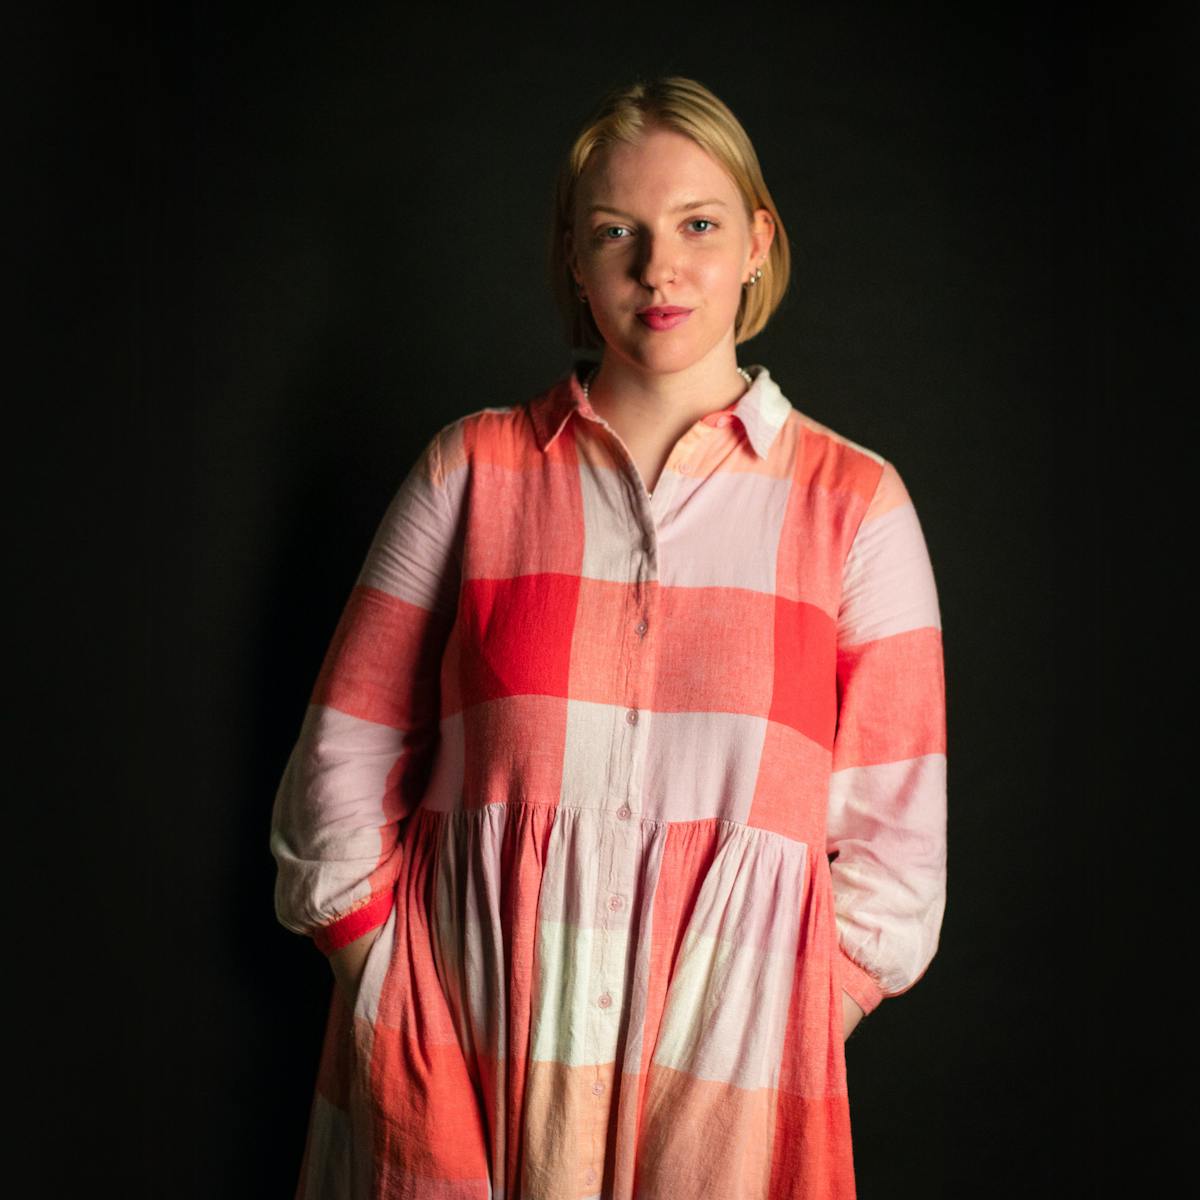 Photographic portrait of a white woman with bobbed blond hair, wearing a red checked dress, standing against a black background. She has her hands in her pockets and quietly smiling straight to camera.